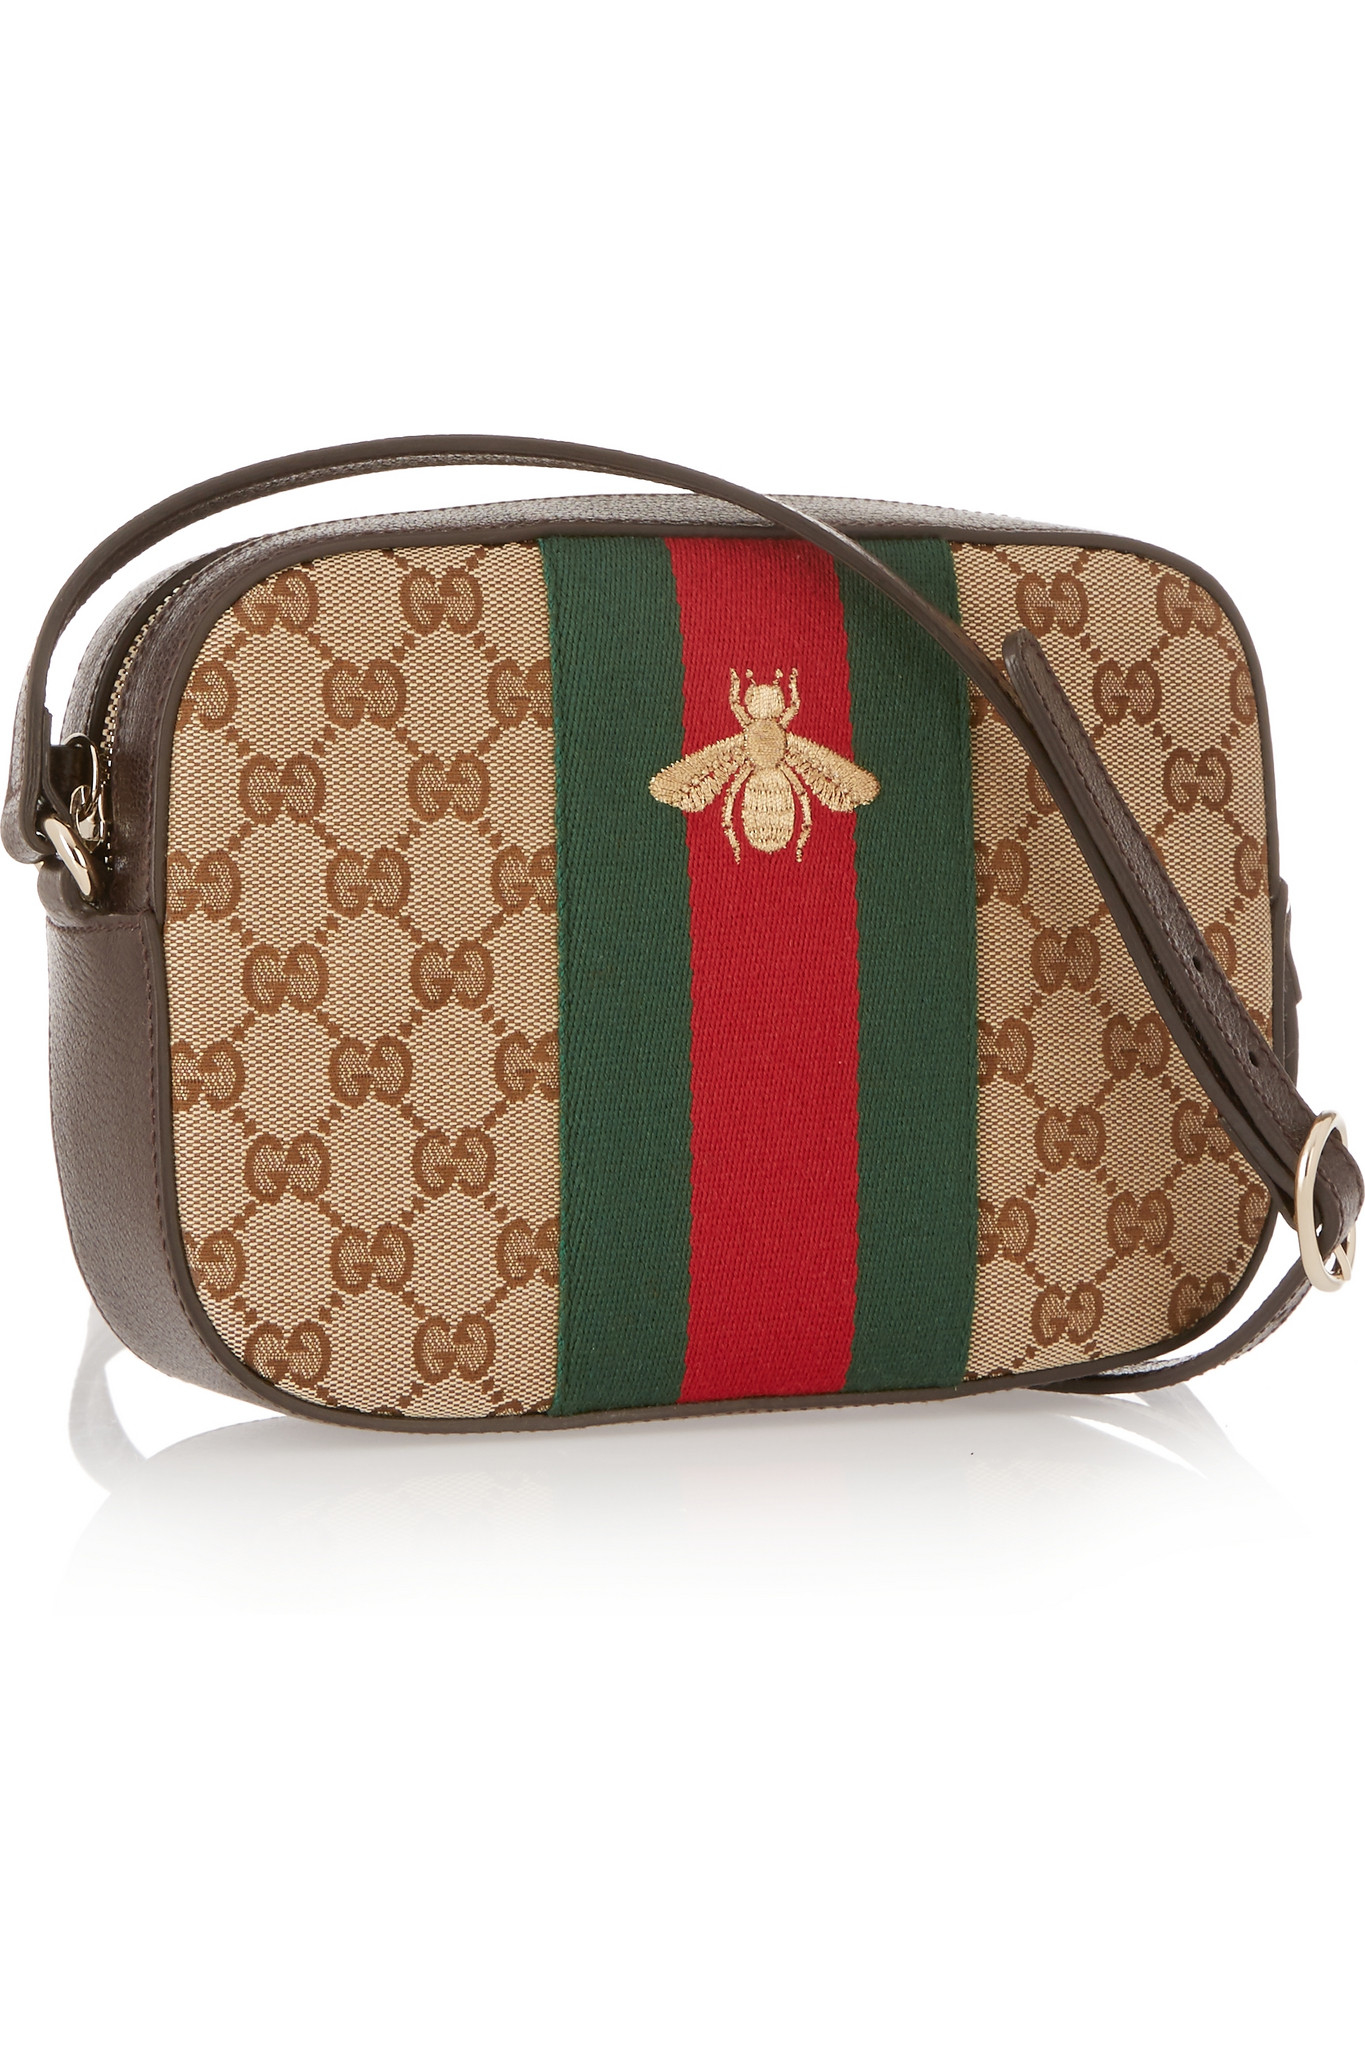 gucci bag with bumble bee, OFF 77%,www 